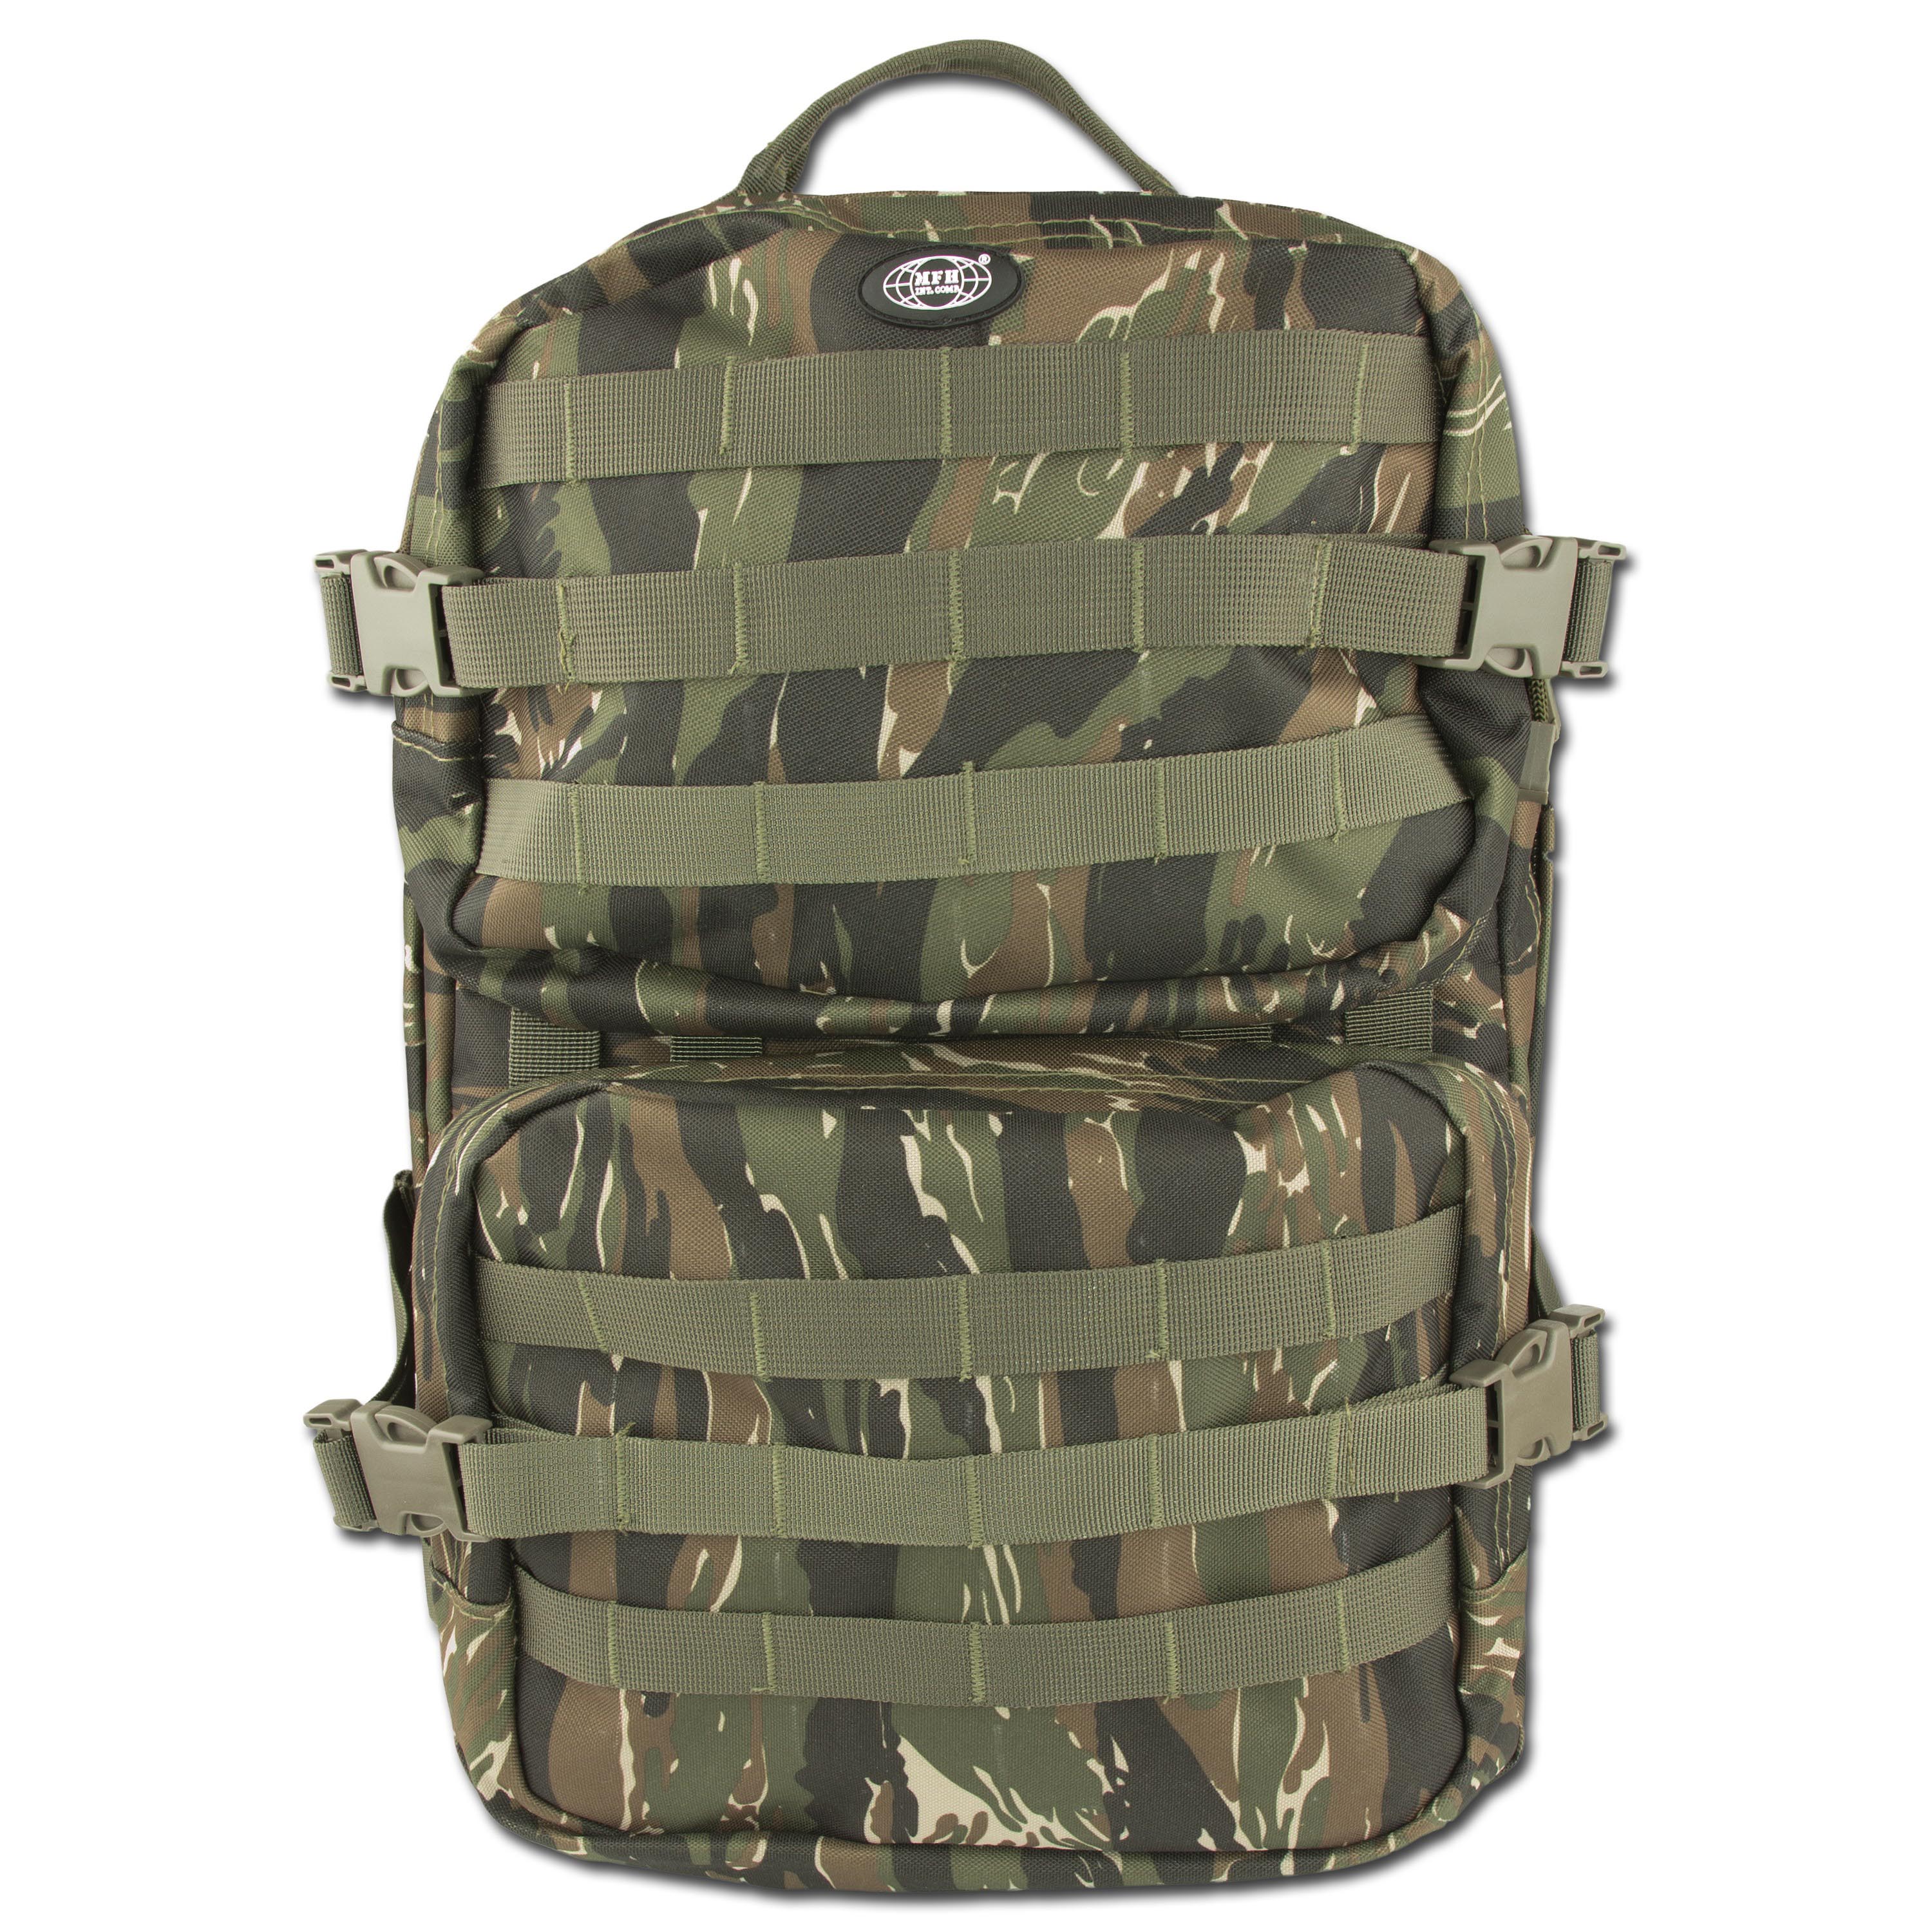 Purchase the Backpack U.S. Assault Pack III tiger stripe by ASMC